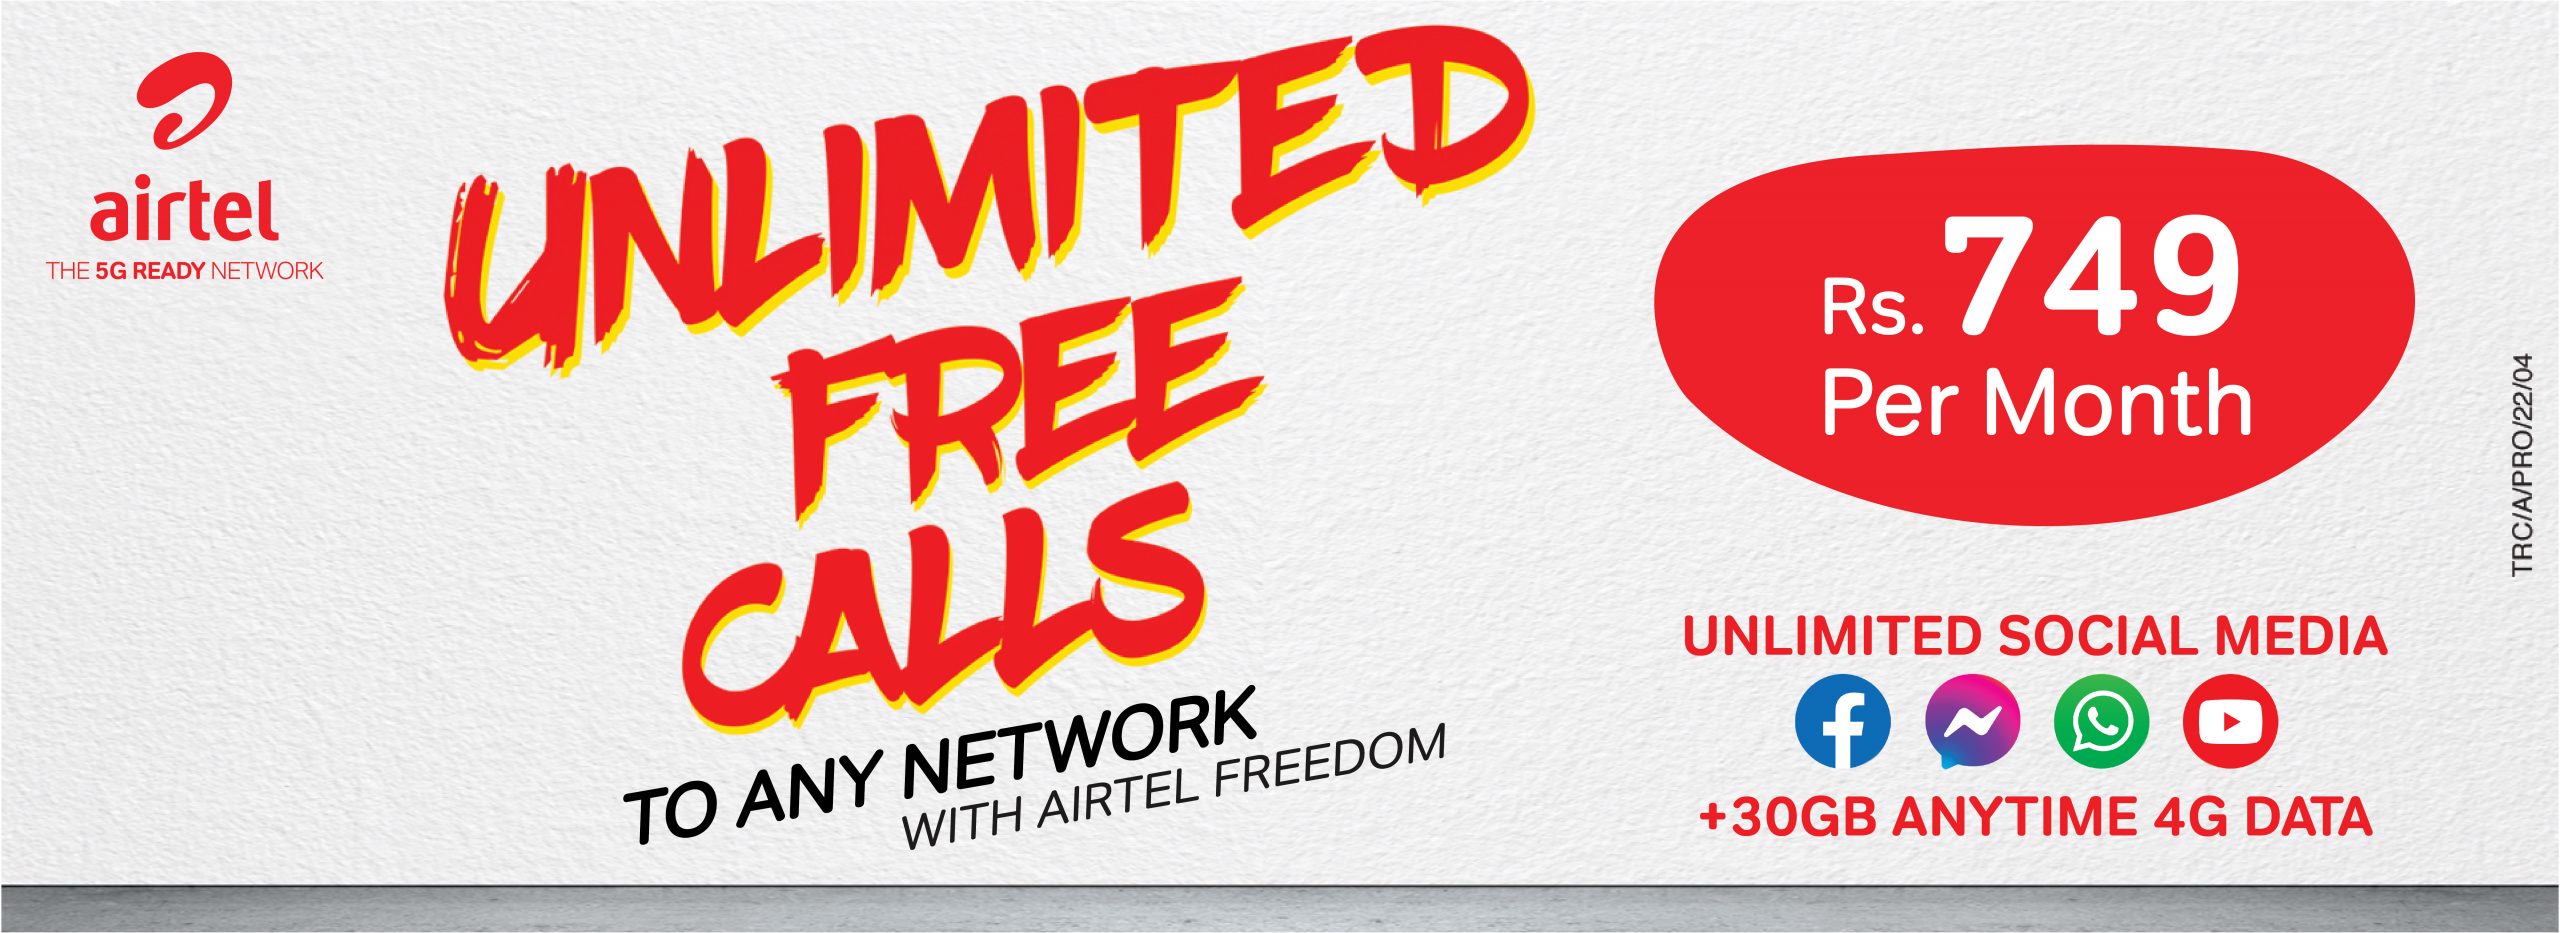 Airtel Freedom 749 Package Details